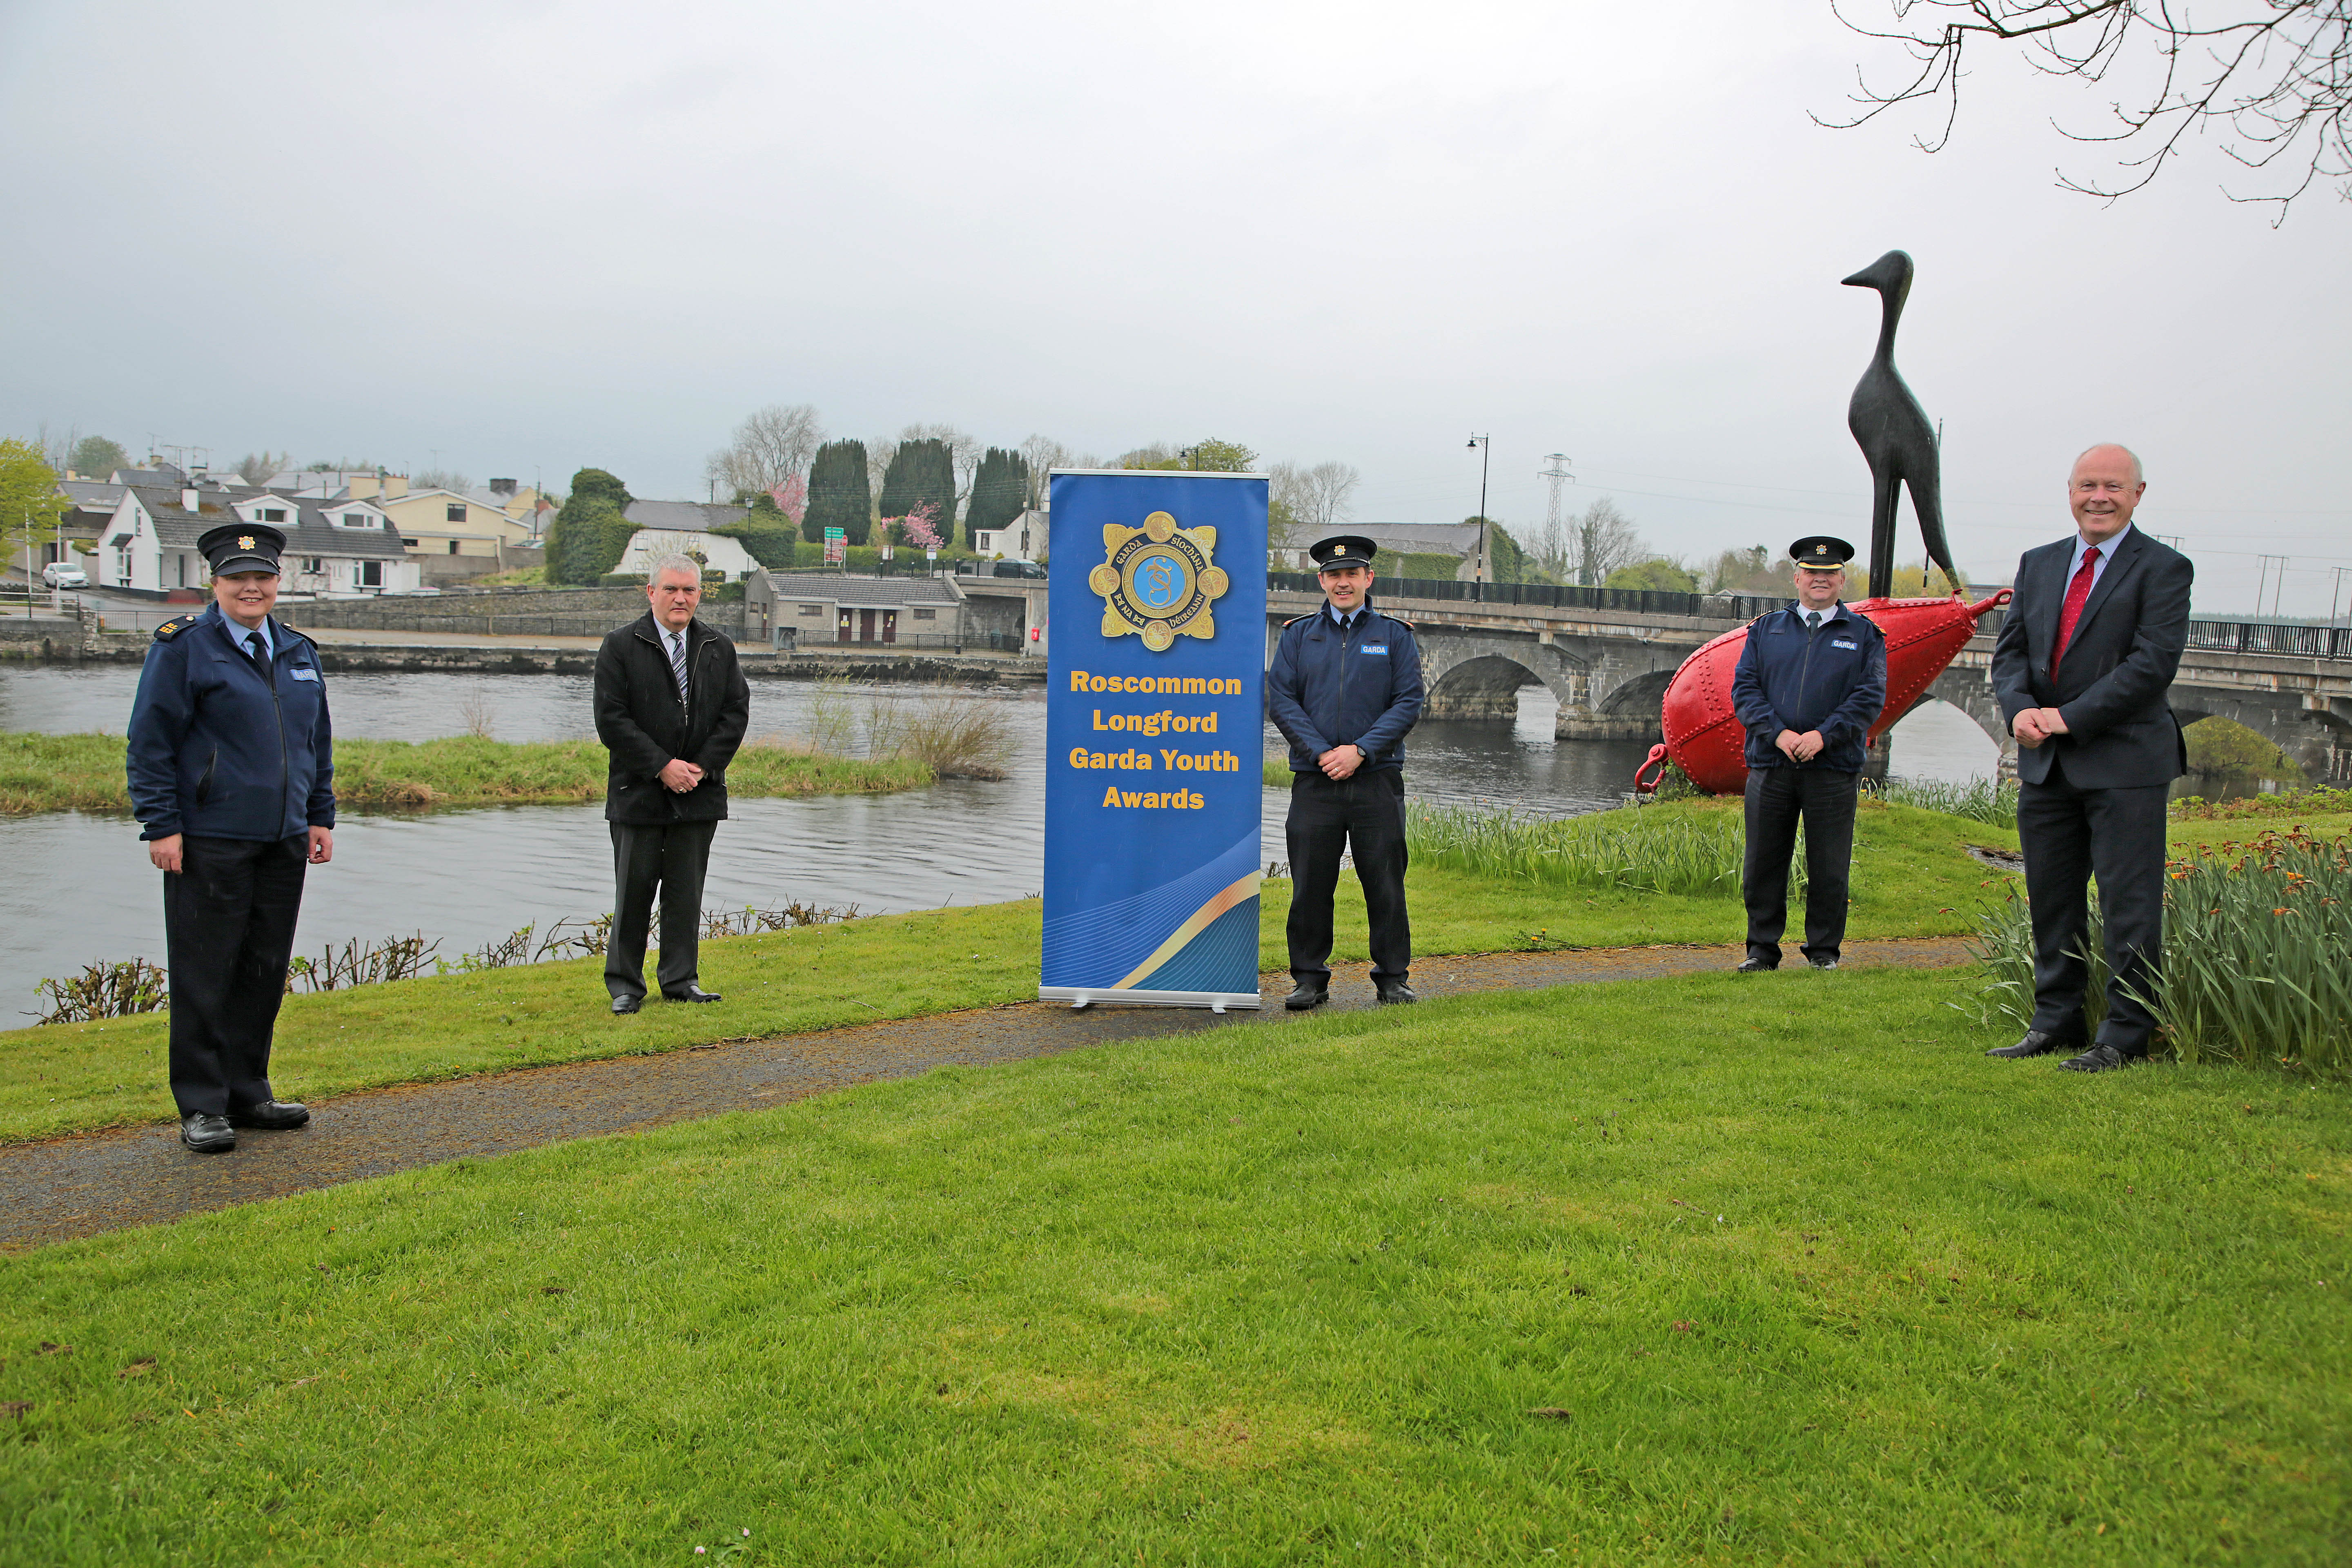 Standing on the banks of the River Shannon with the bridge at Lanesboro/Ballyleague in the background to promote the Roscommon-Longford Garda Youth Awards are: Coordinator of the Roscommon-Longford Garda Youth Awards Garda Angela Mullooly; Chief Executive Roscommon County Council Eugene Cummins; Chairman of Roscommon-Longford Garda Youth Awards Inspector David Cryan; Roscommon-Longford Garda Division Chief Superintendent Tony Healy and Chief Executive Longford County Council Paddy Mahon. 